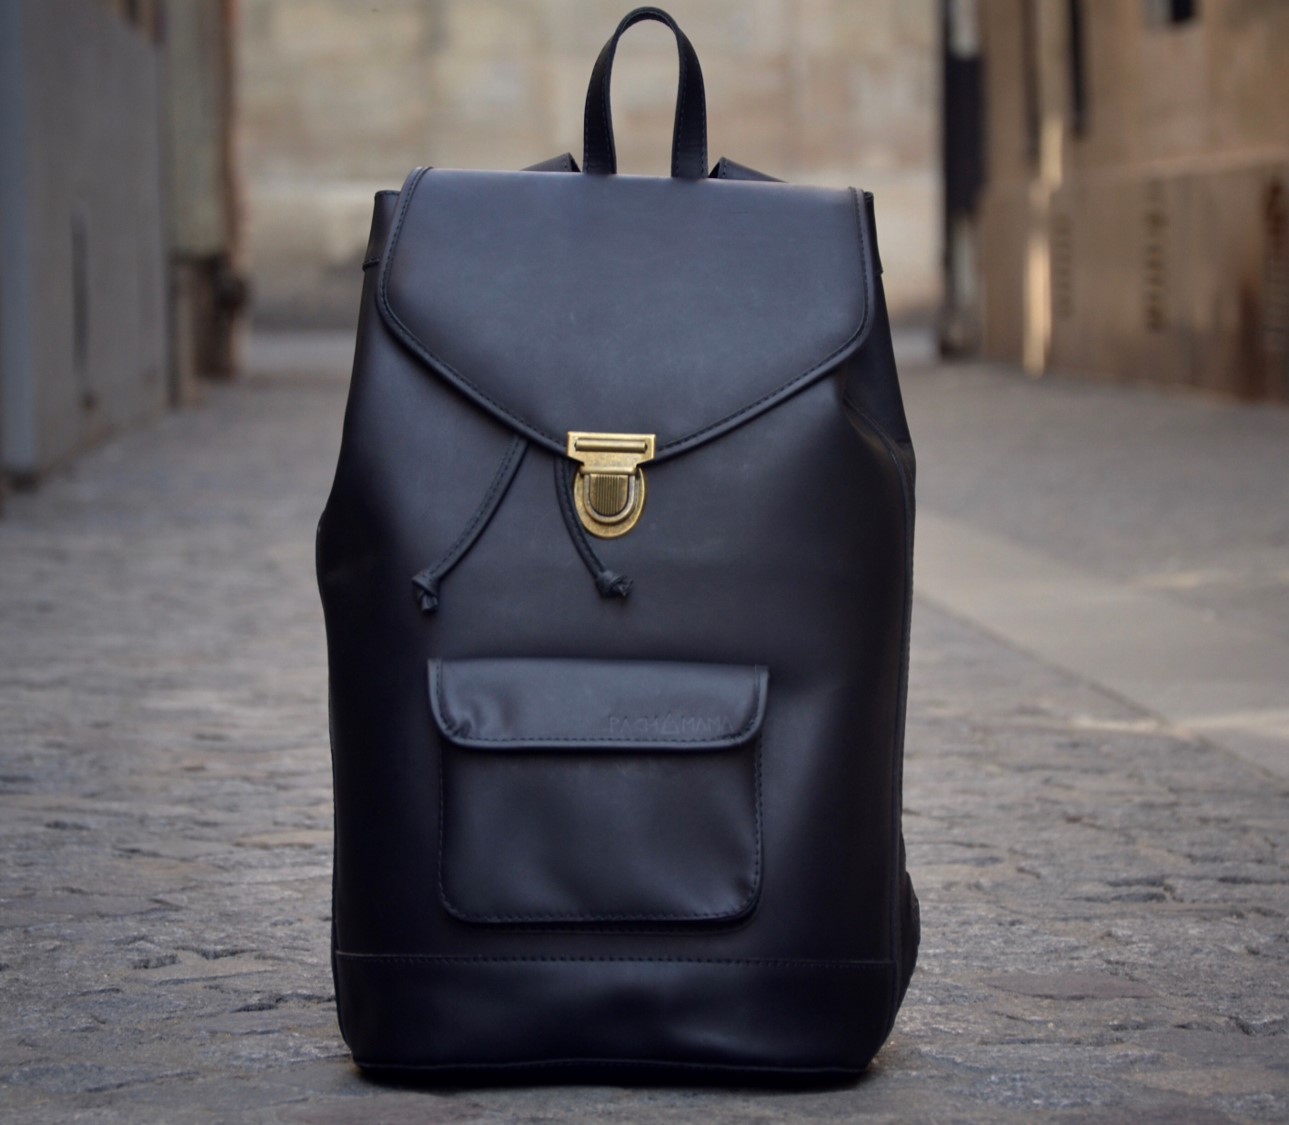 Pachamama - JOE black leather backpack - Urban leather backpack for men